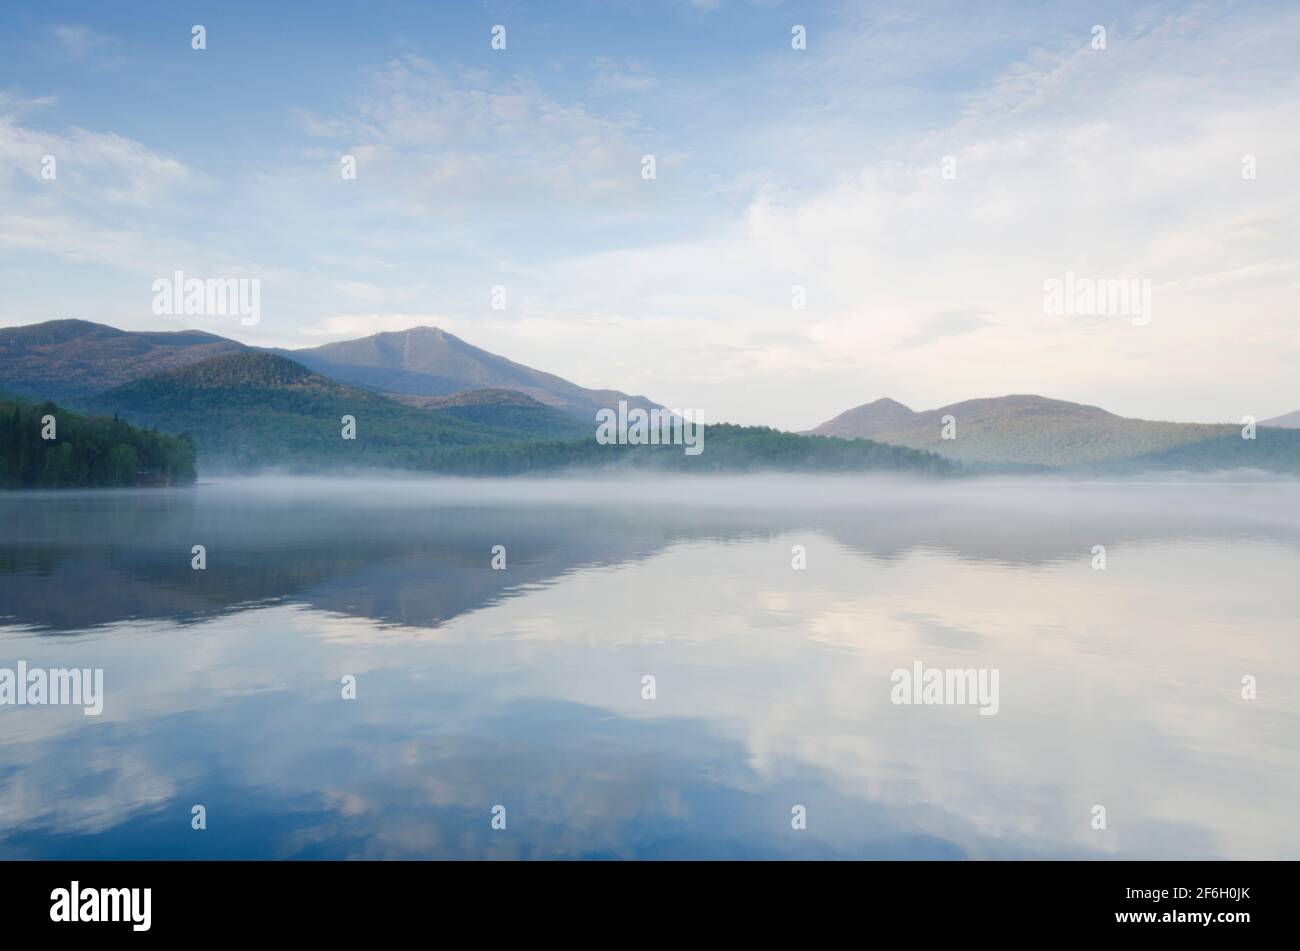 United States, New York, Lake Placid, Calm surface of Lake Placid and Whiteface Mountain Stock Photo